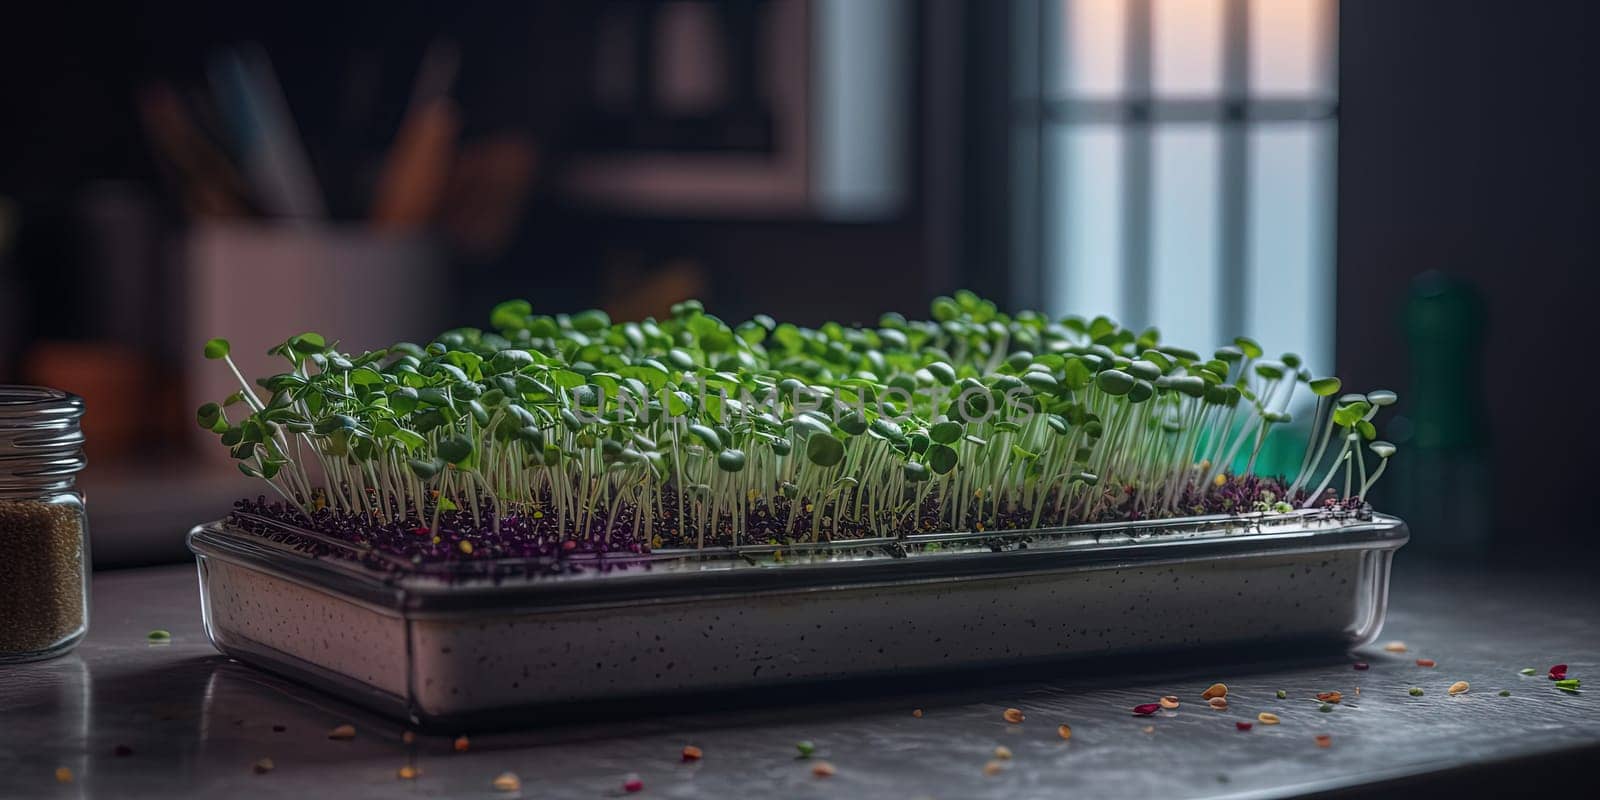 Growing micro green sprouts in container by tan4ikk1